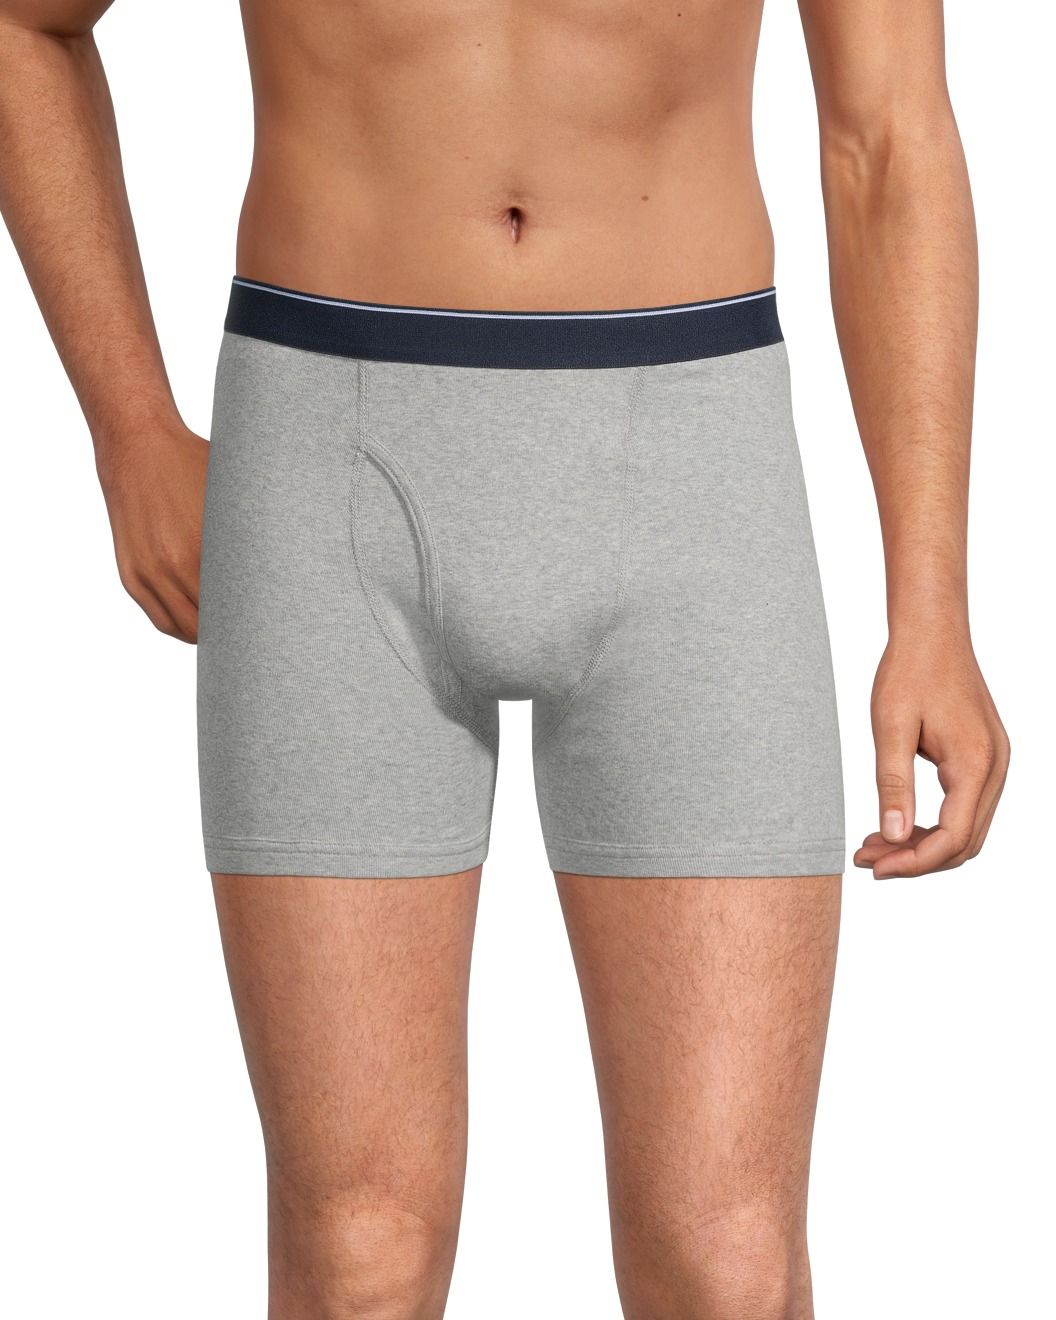 MEN Boxers- DH(Denver Hayes)- stock Offerings at discount price